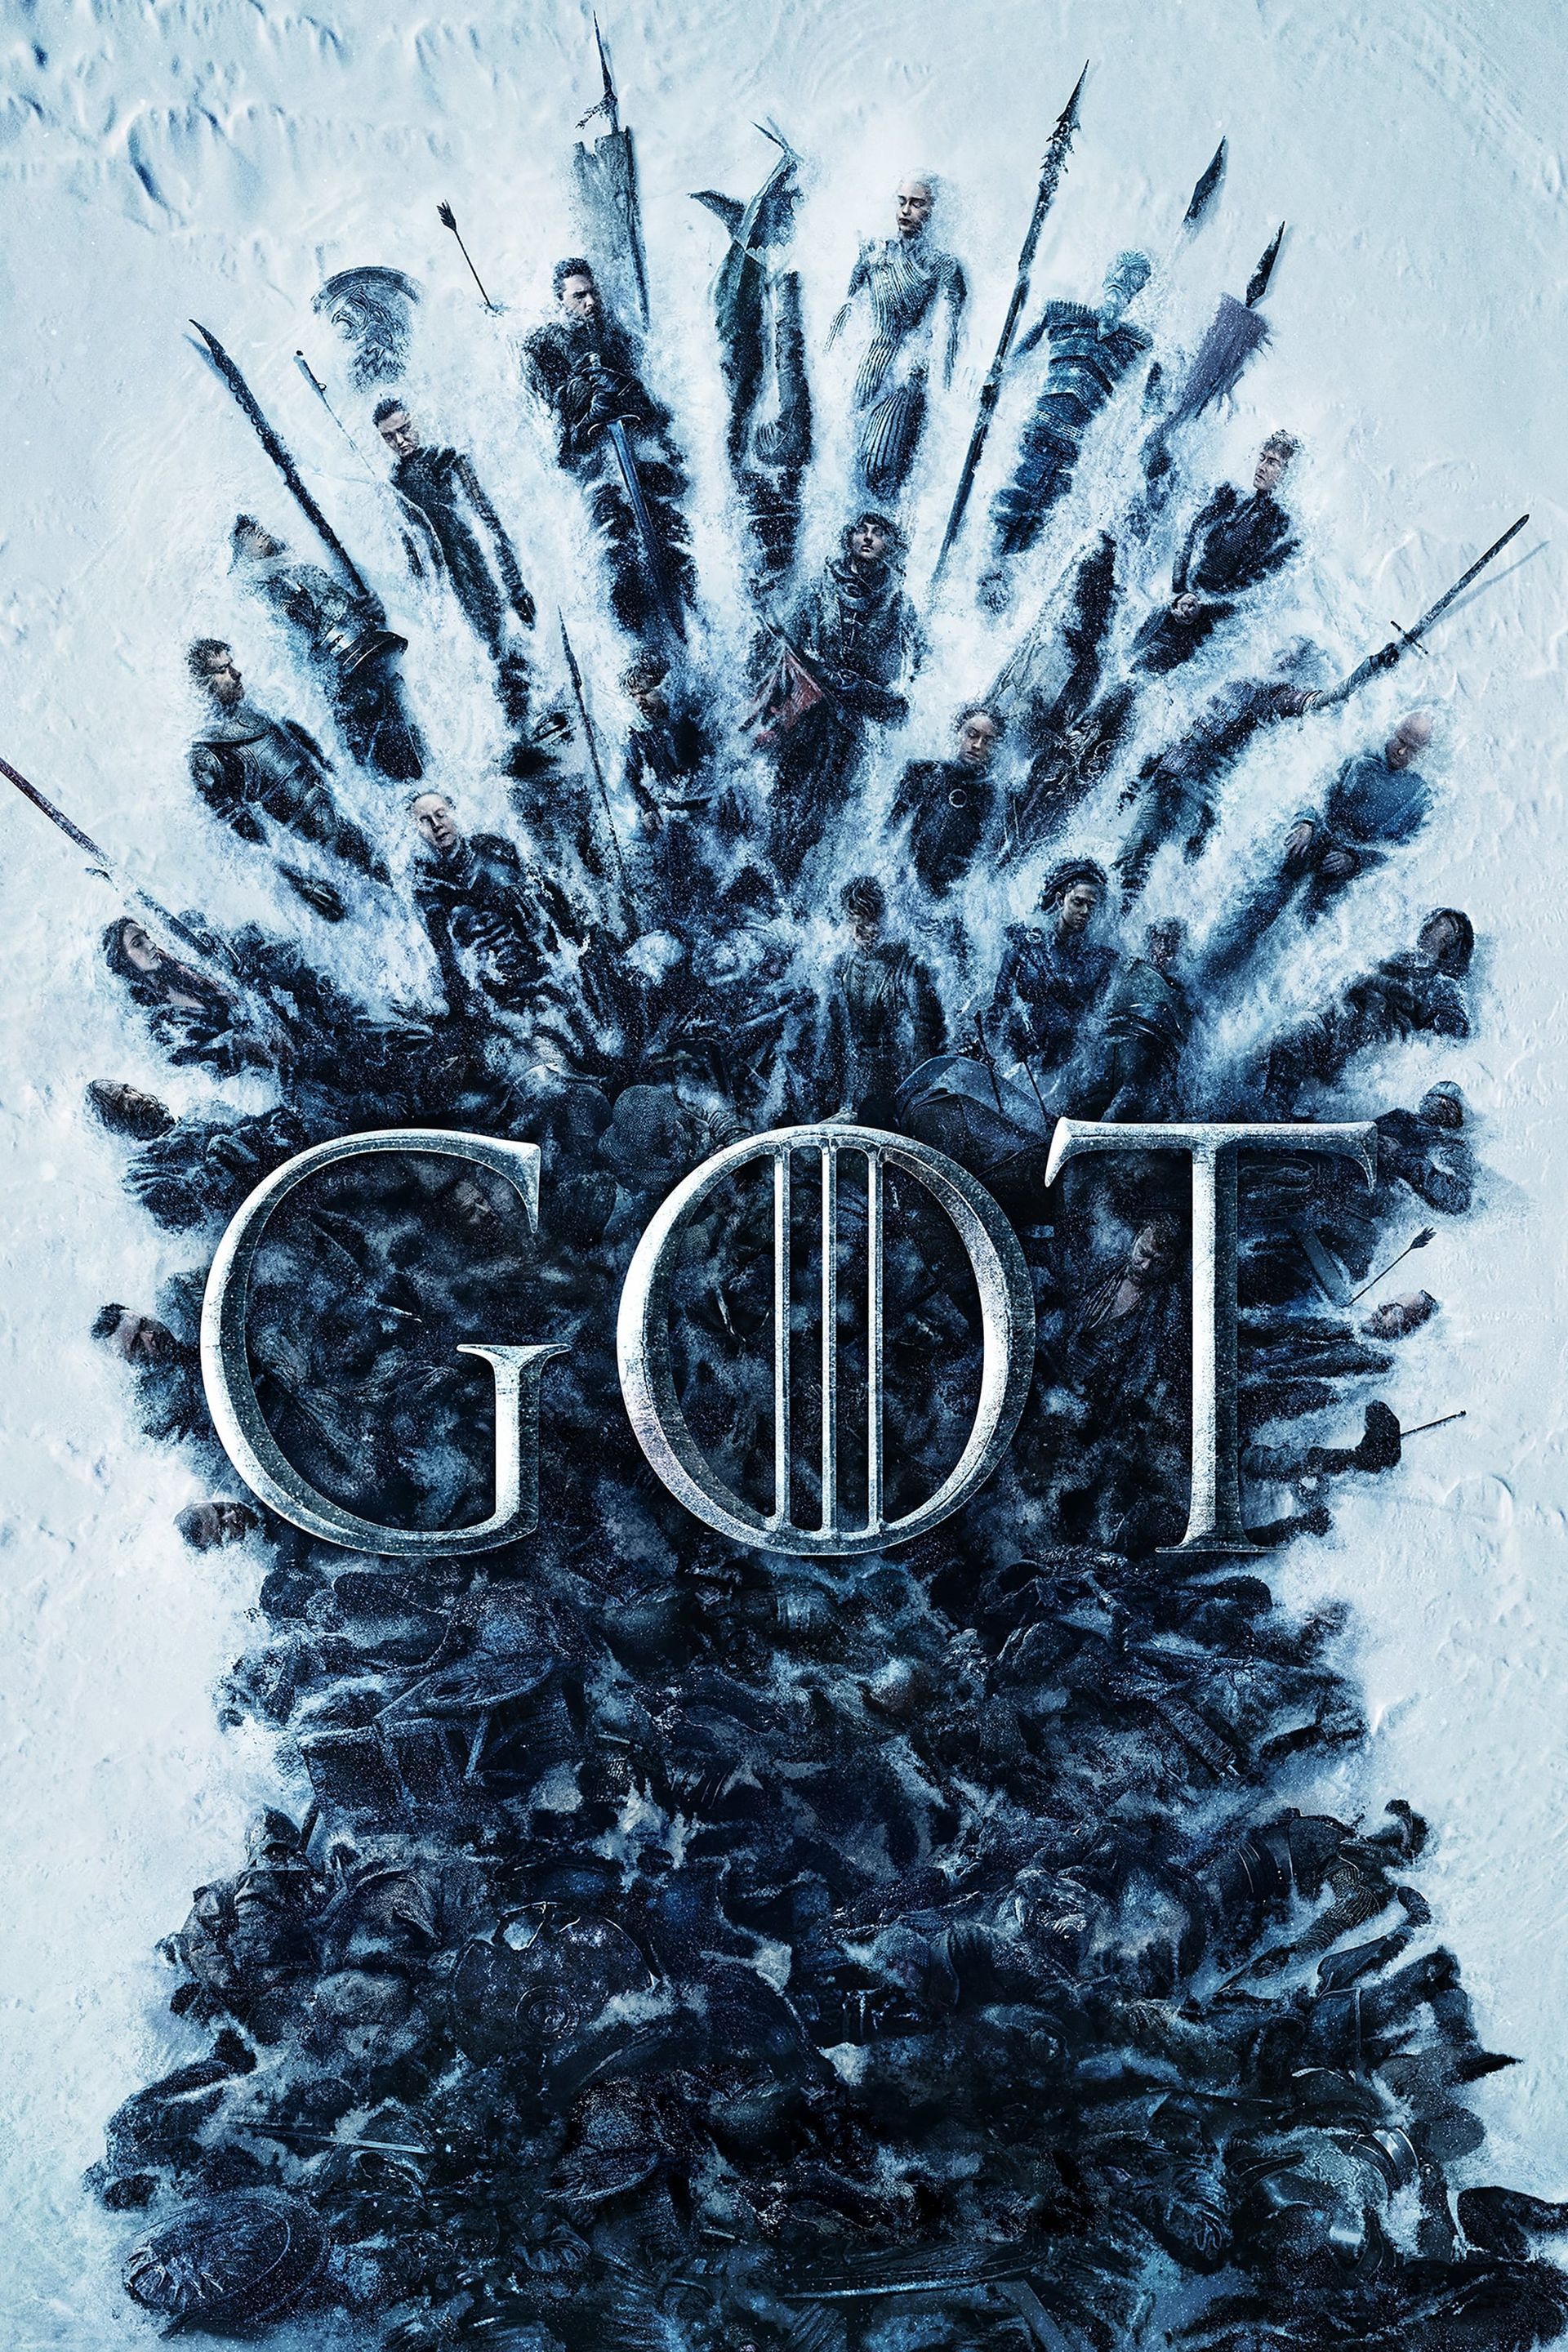 How to watch and stream Game of Thrones - 2011-2019 on Roku